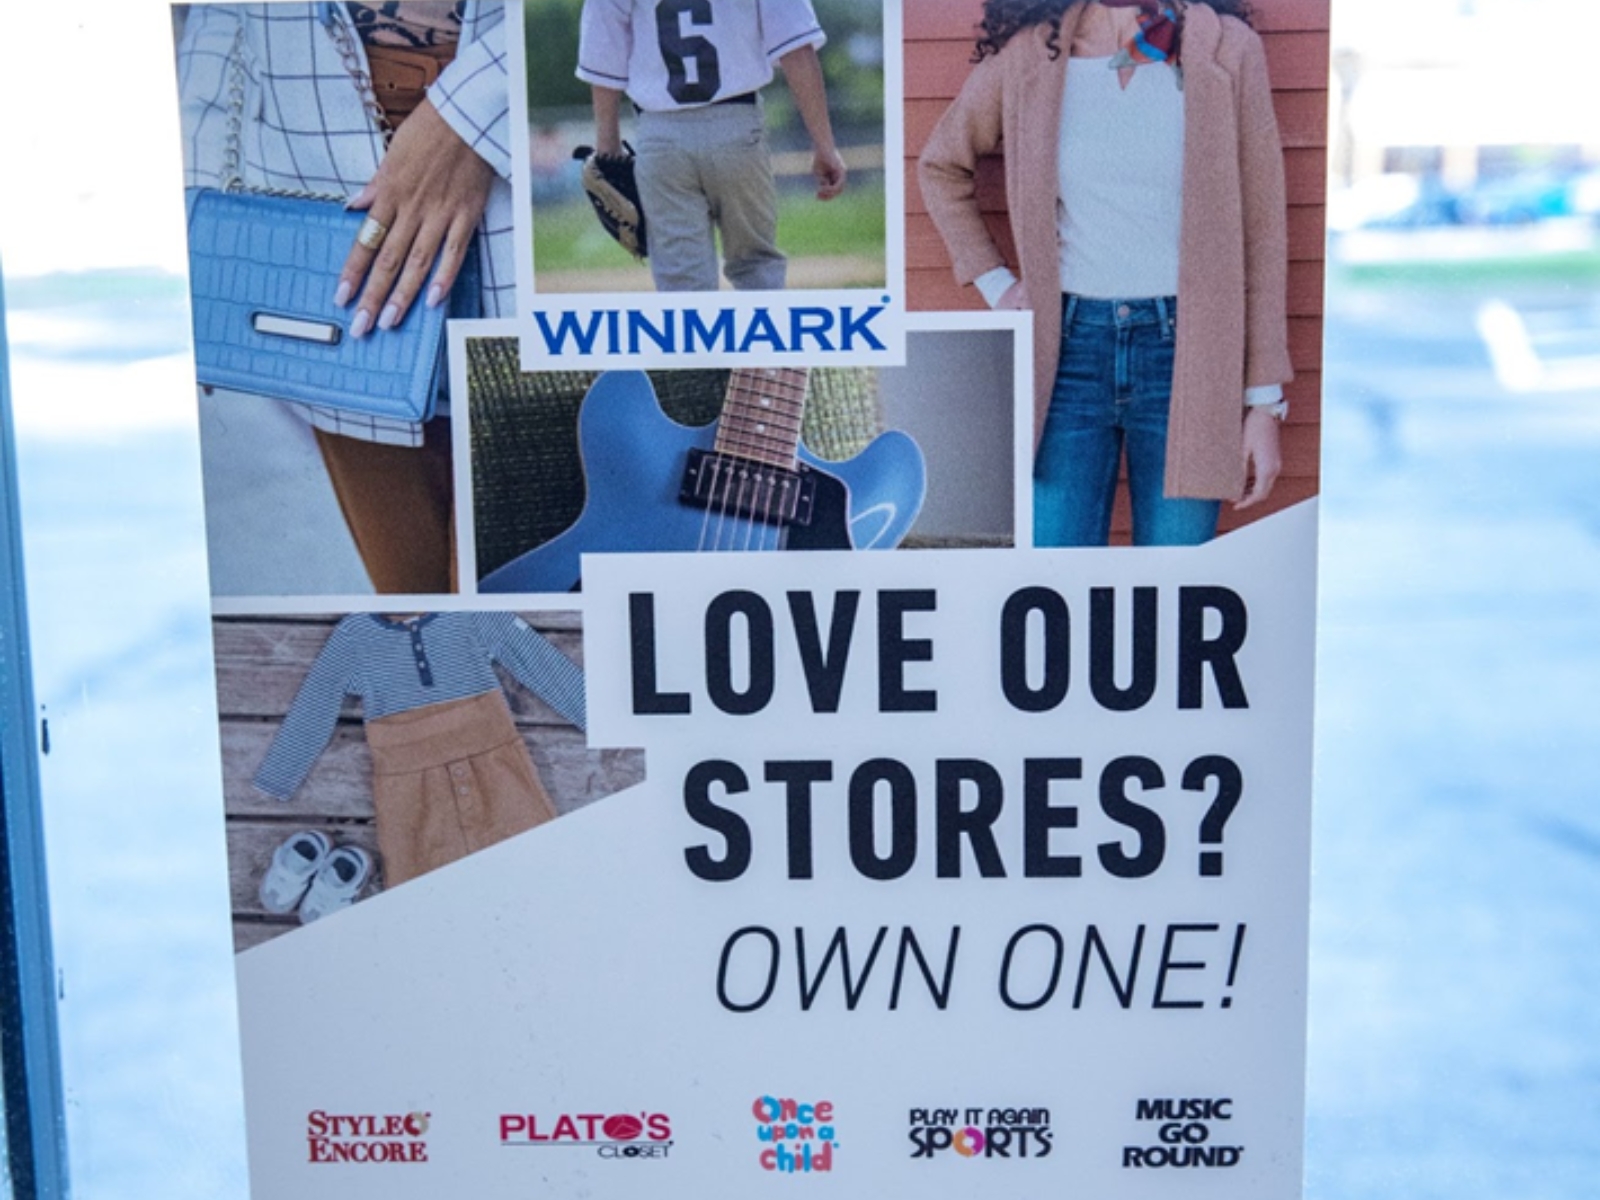 love our stores? own one! winmark franchising flier 